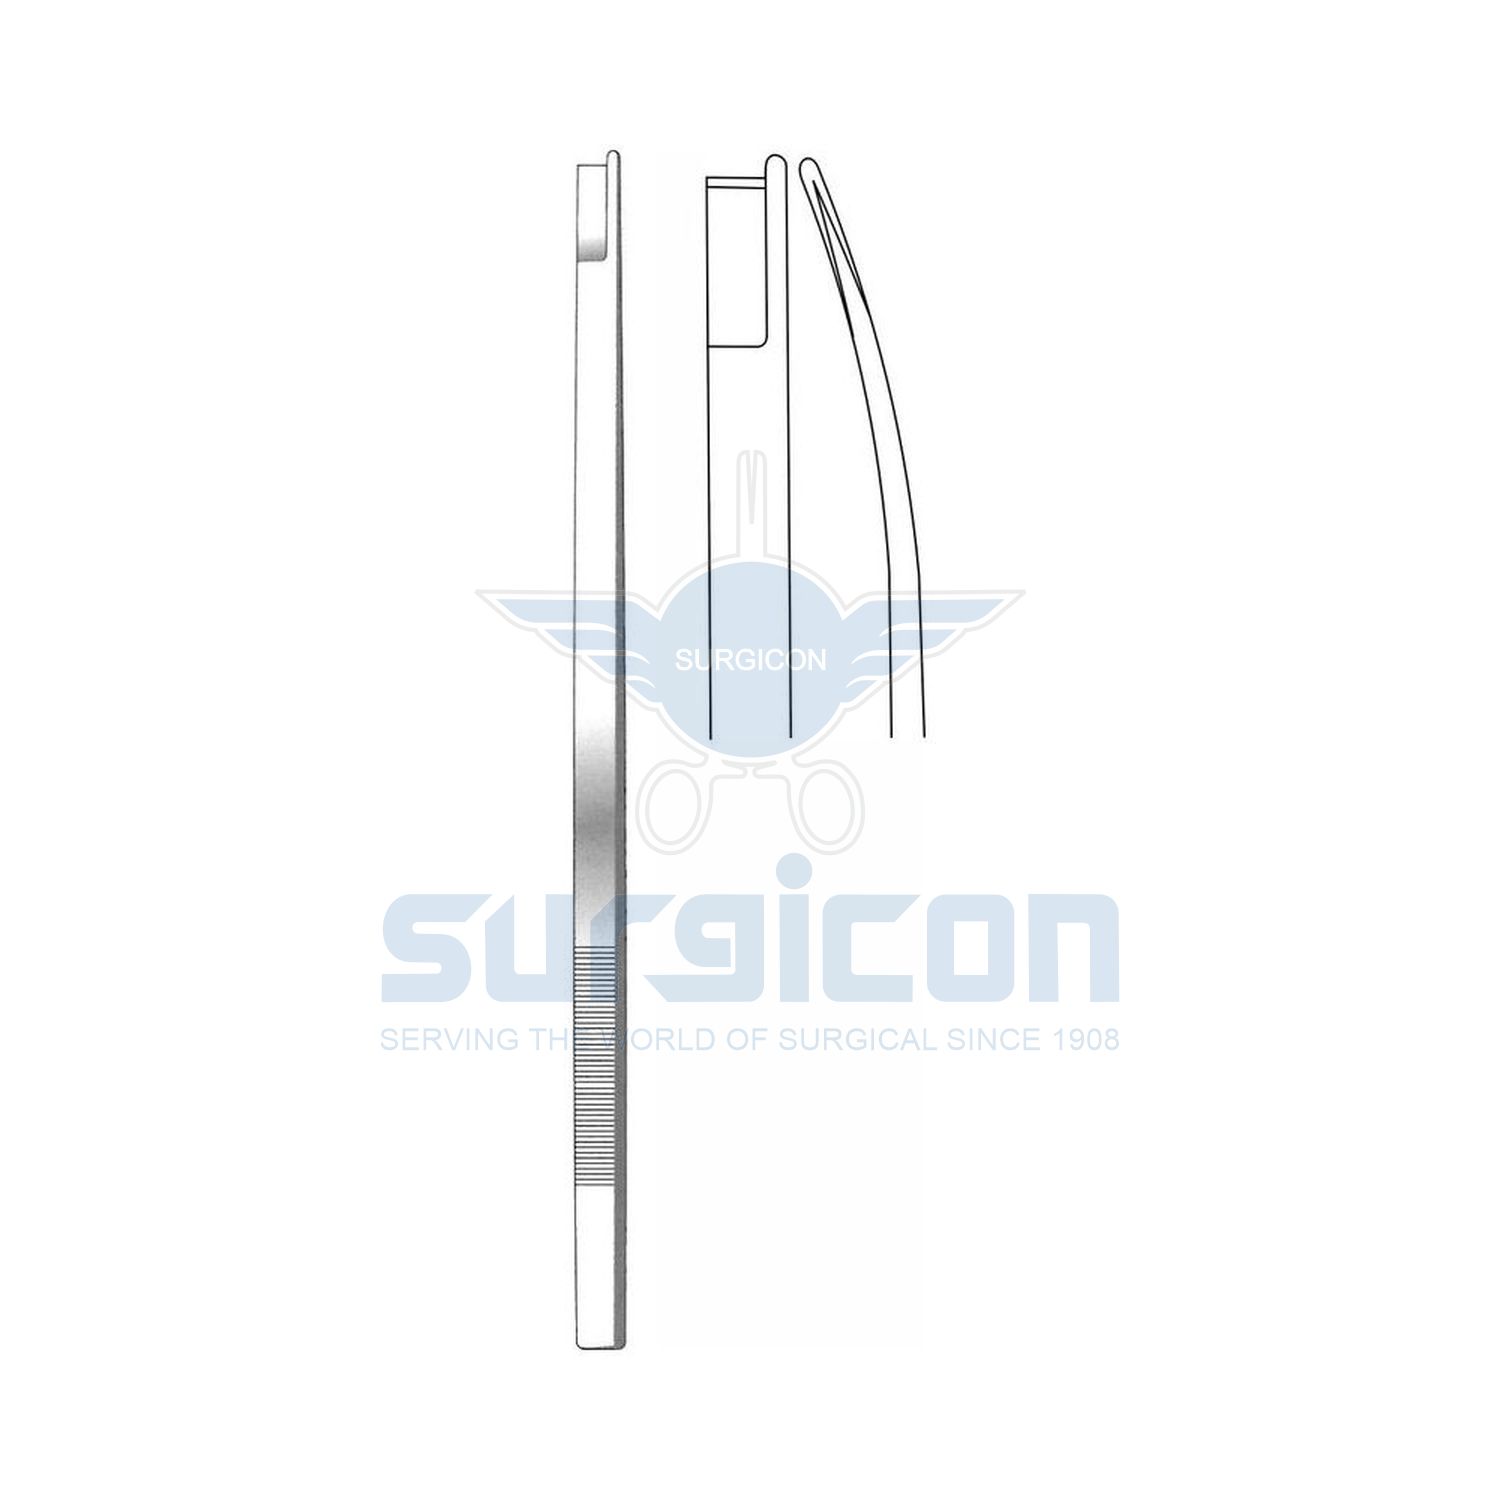 Neivert-Anderson-Osteotome,-Left-Curved-J-32-3680